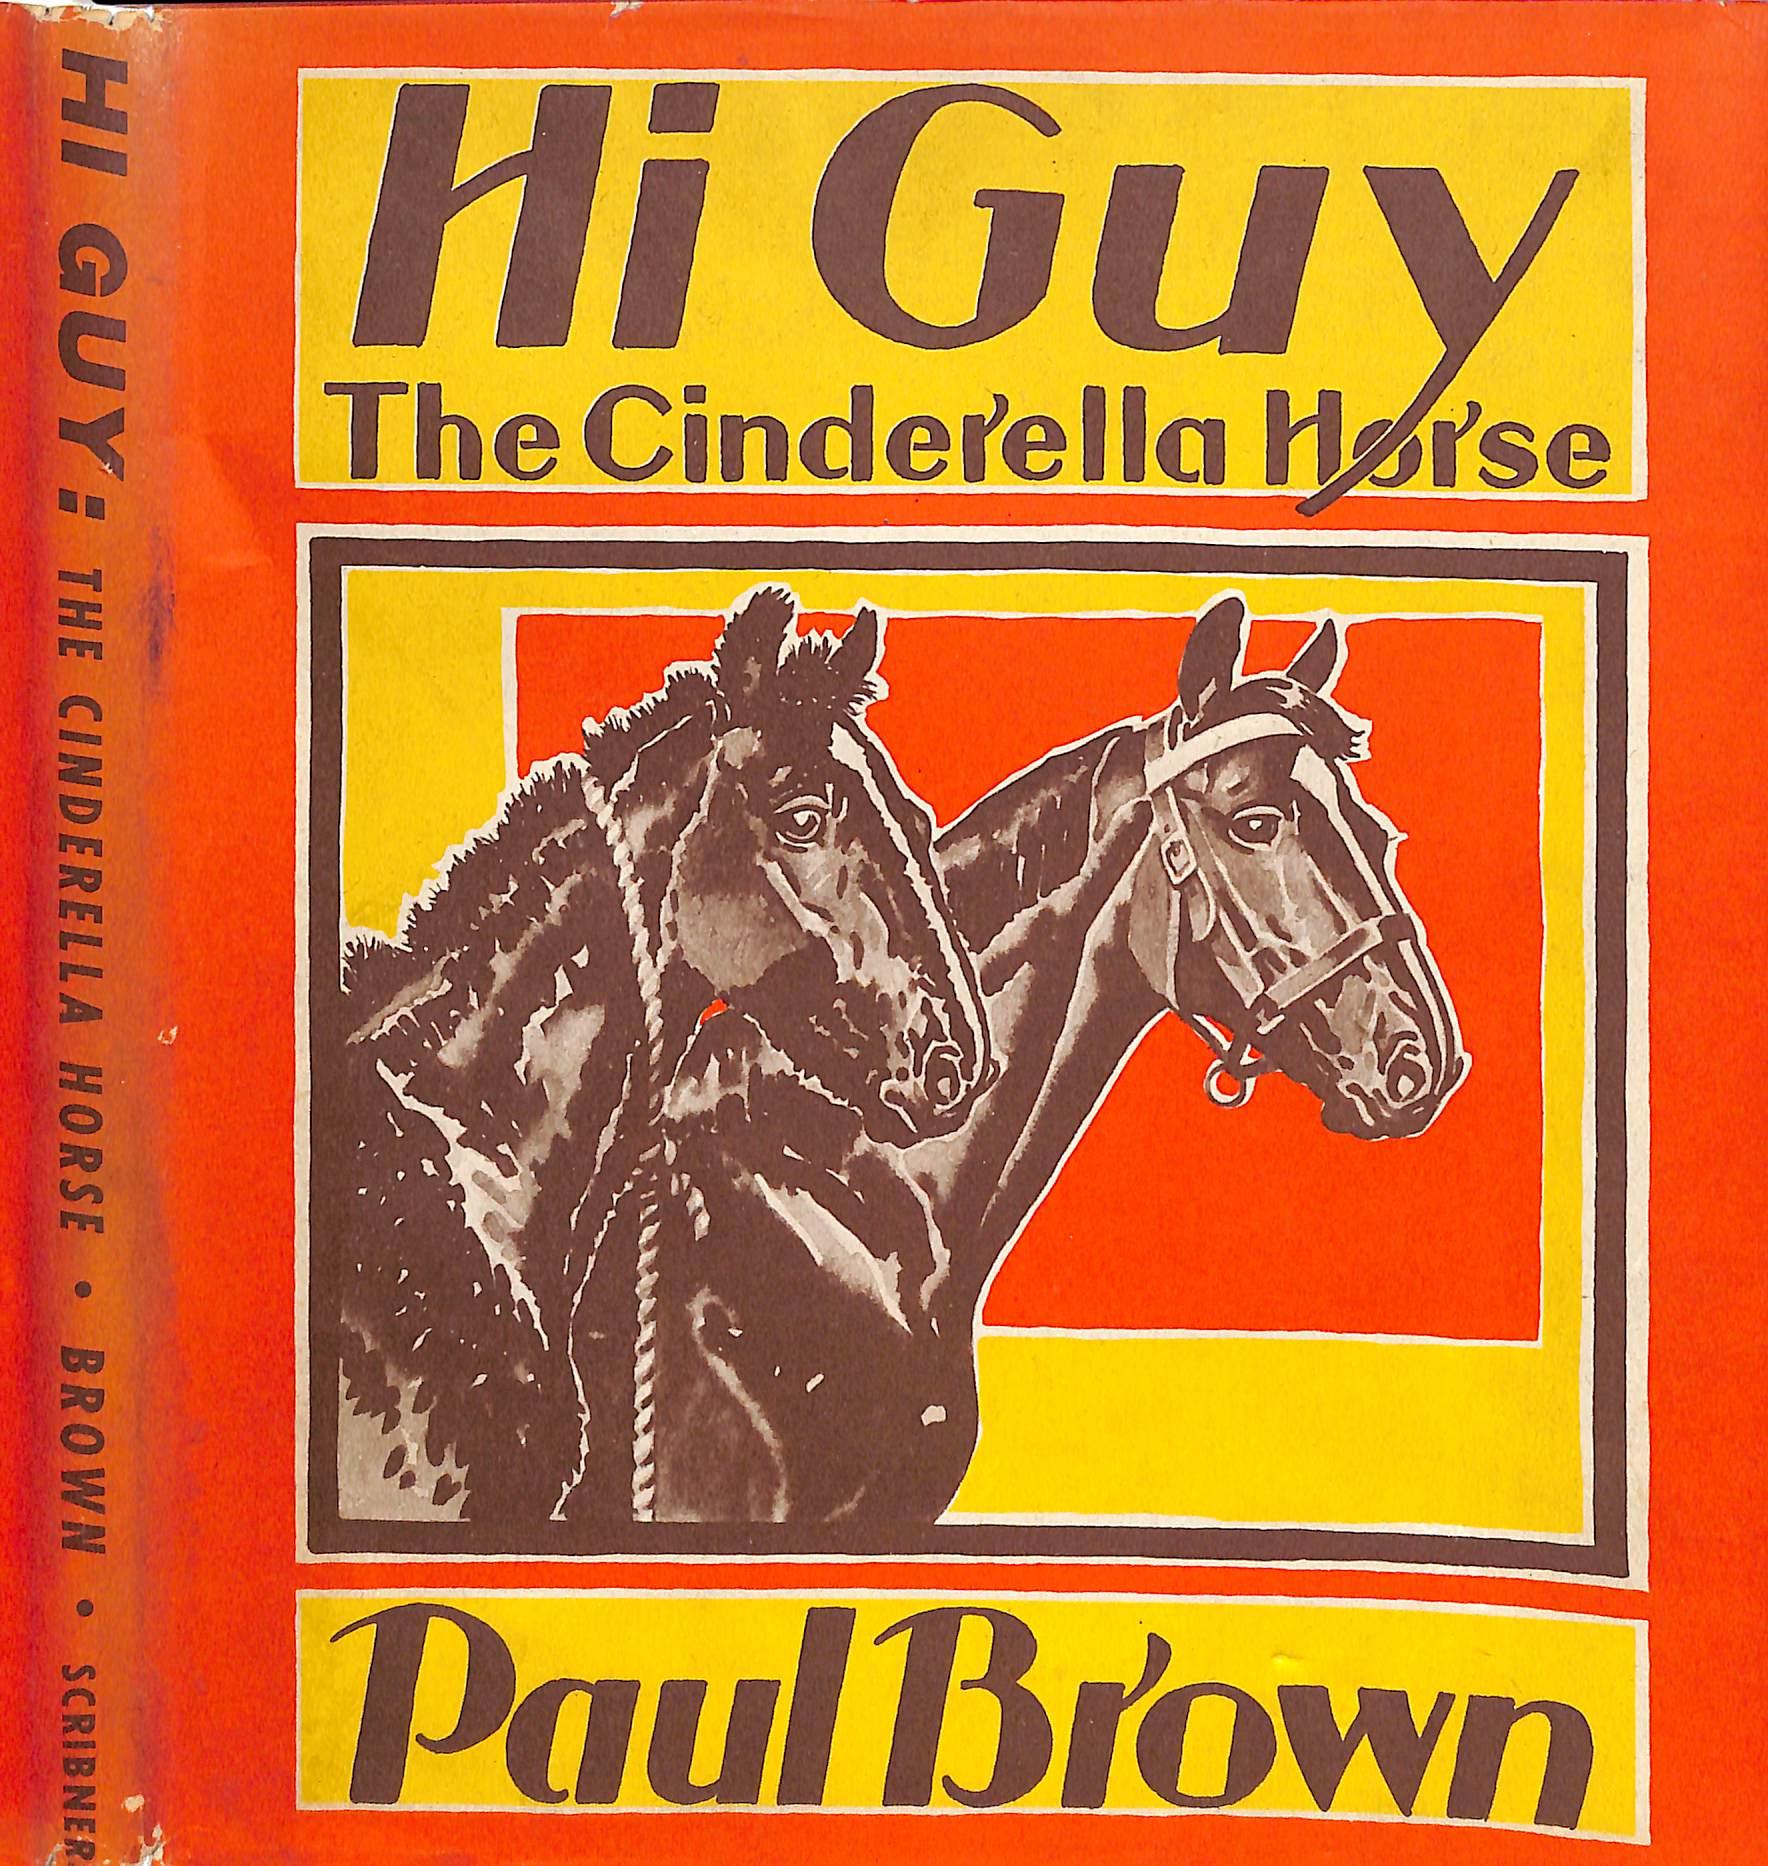 Original 1944 Pencil Drawing From Hi, Guy! The Cinderella Horse By Paul Brown 9 For Sale 2